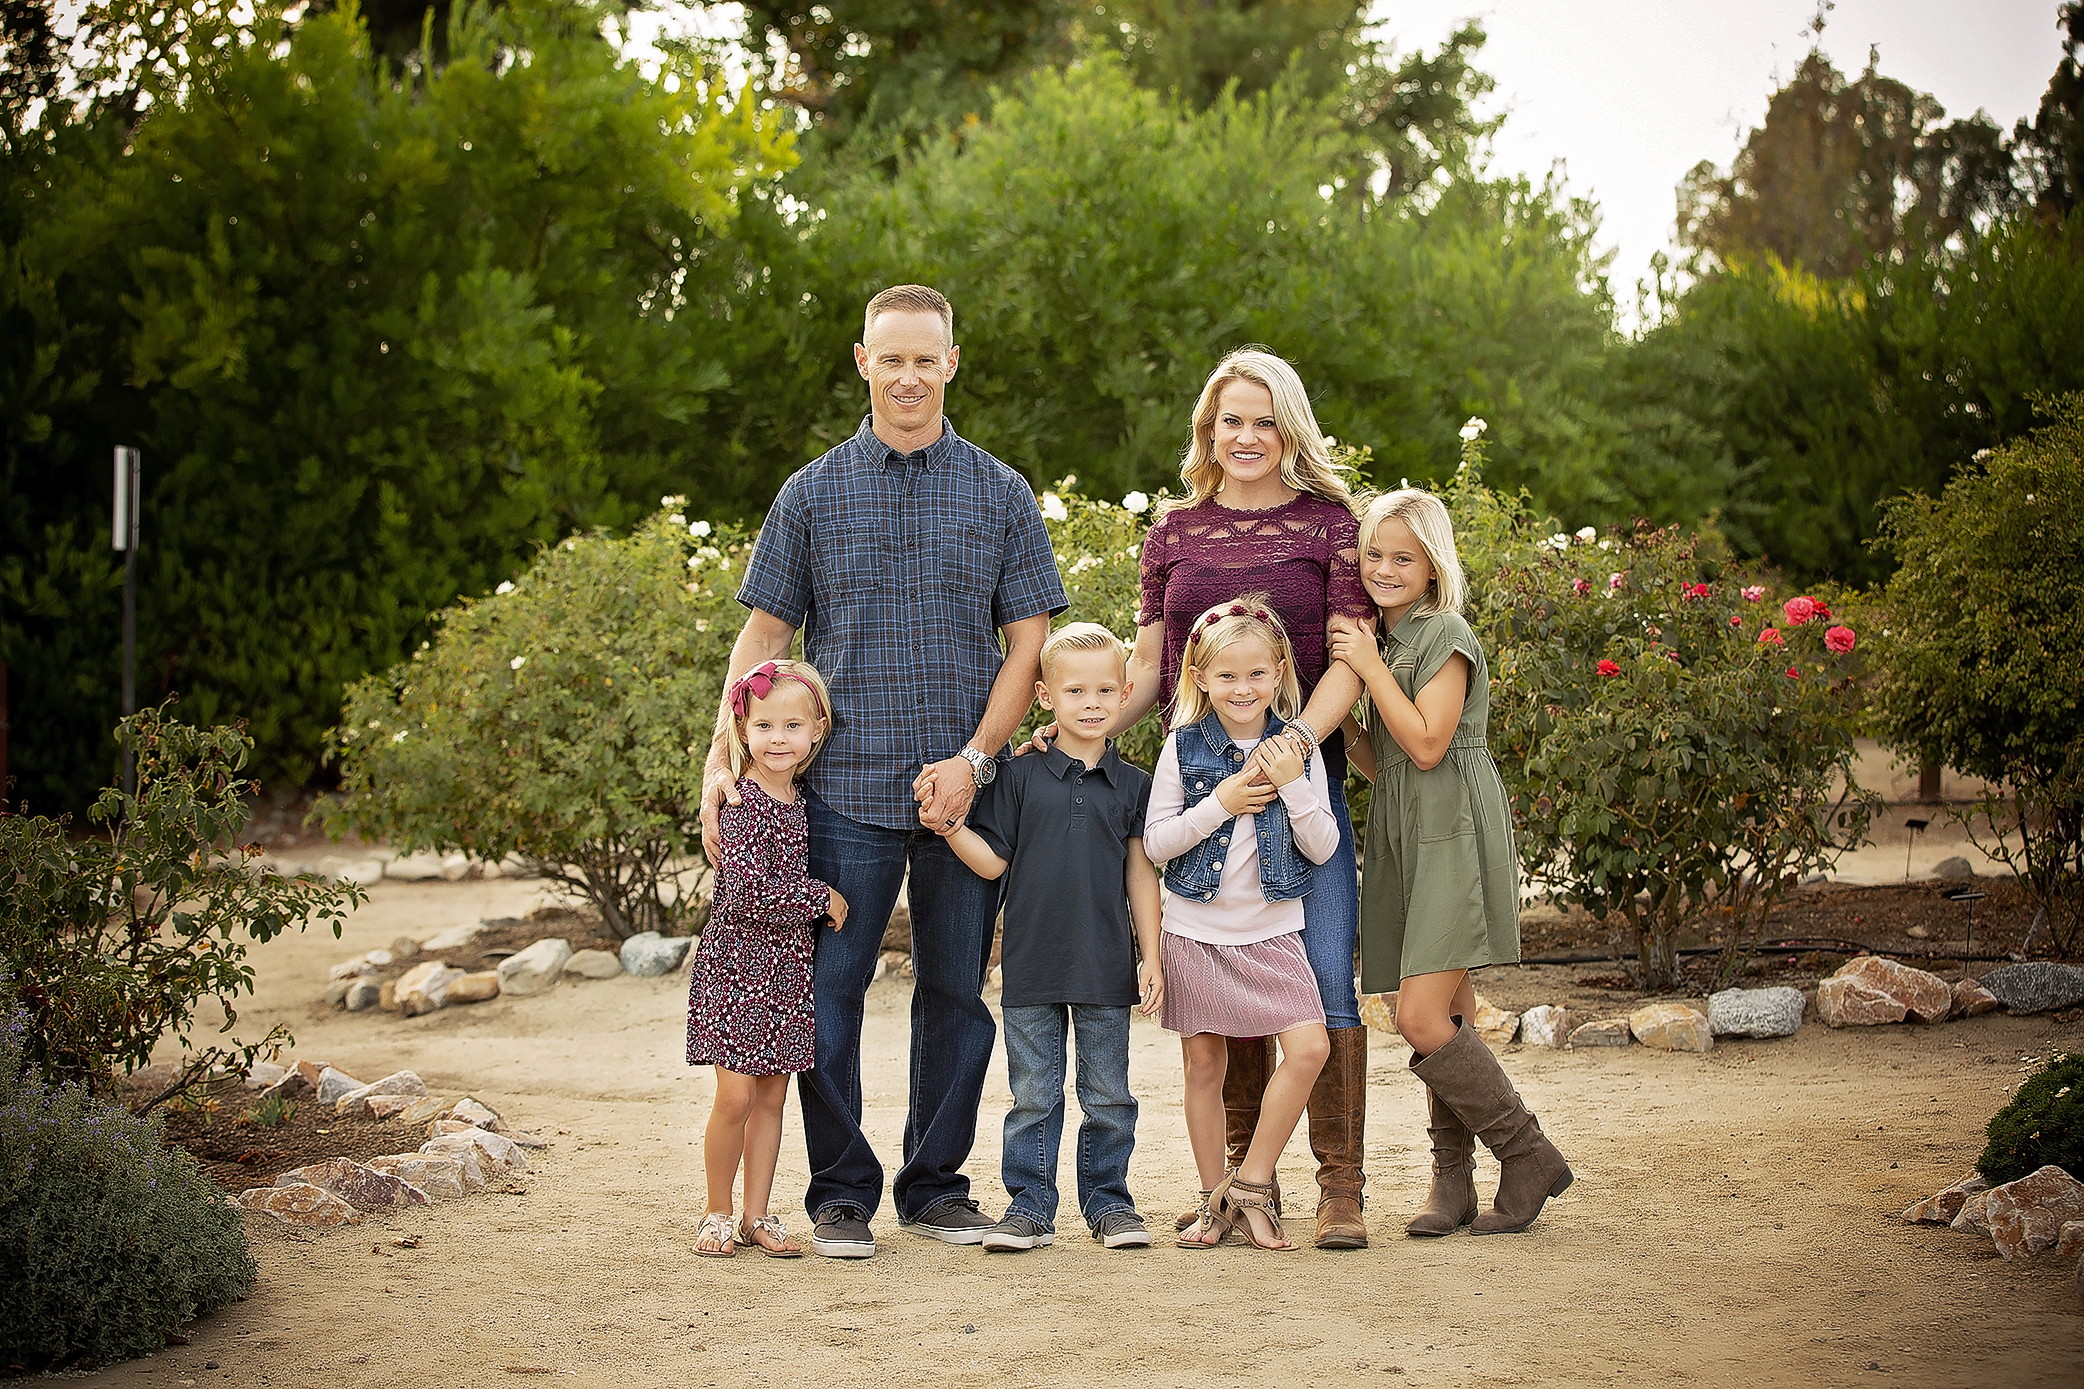 Fall Family Portrait Sessions 2019 | Inland Empire Family Photographer